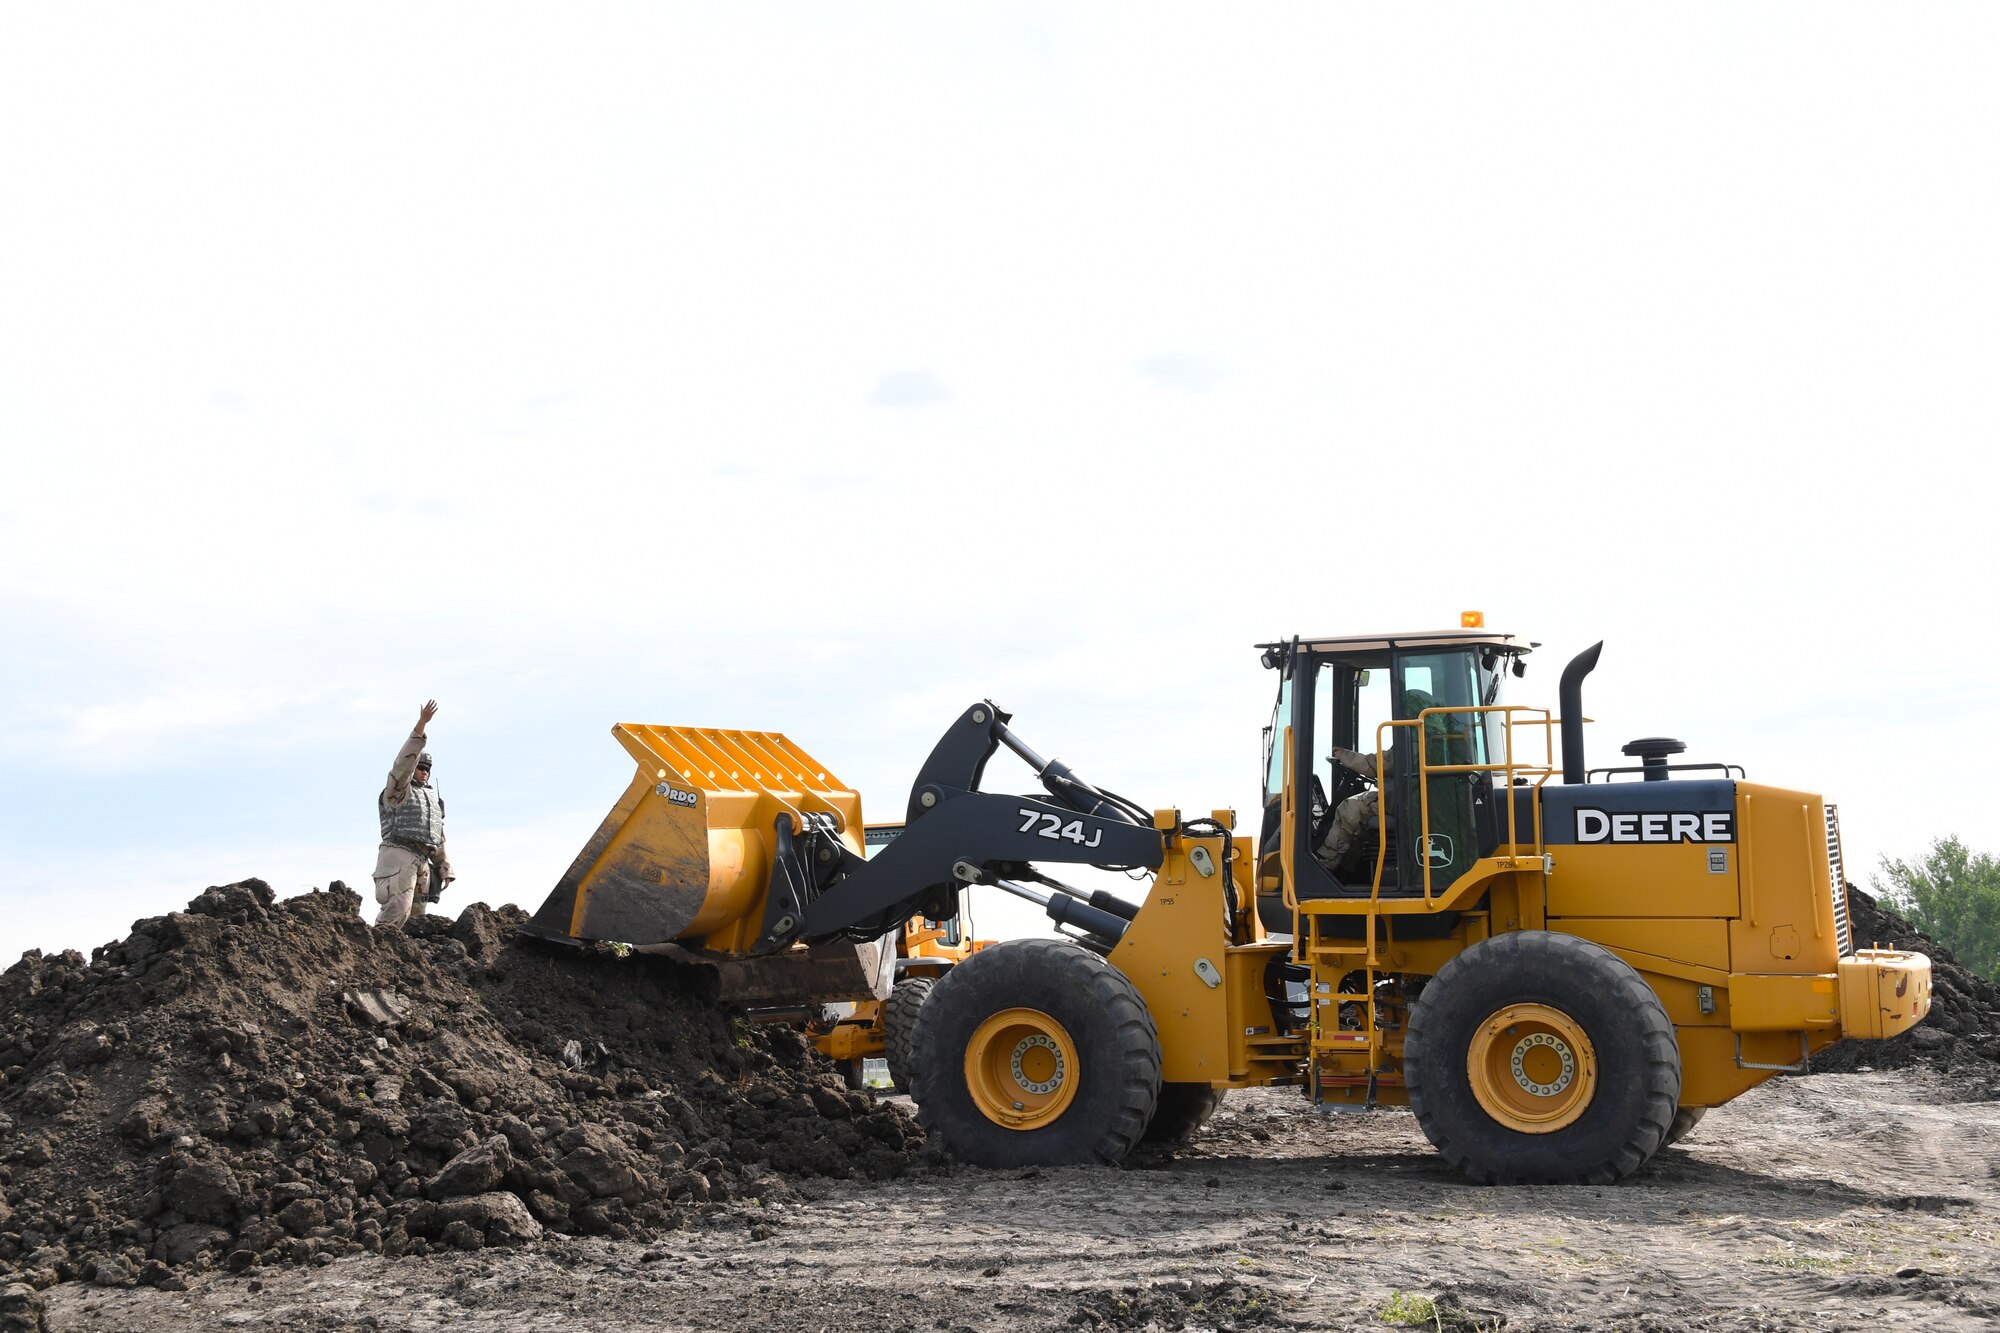 Staff Sgt. Newington Tamaalii, pavements and equipment supervisor with the 319th Civil Engineer Squadron, directs a front-end loader as part of mission essential equipment training June 1, 2018, on Fargo Air National Guard Base, North Dakota. Tamaalii and his team were practiced building a fuel bladder containment berm with the help of the 319 CES execution support team. (U.S. Air Force photo by Airman 1st Class Elora J. Martinez)